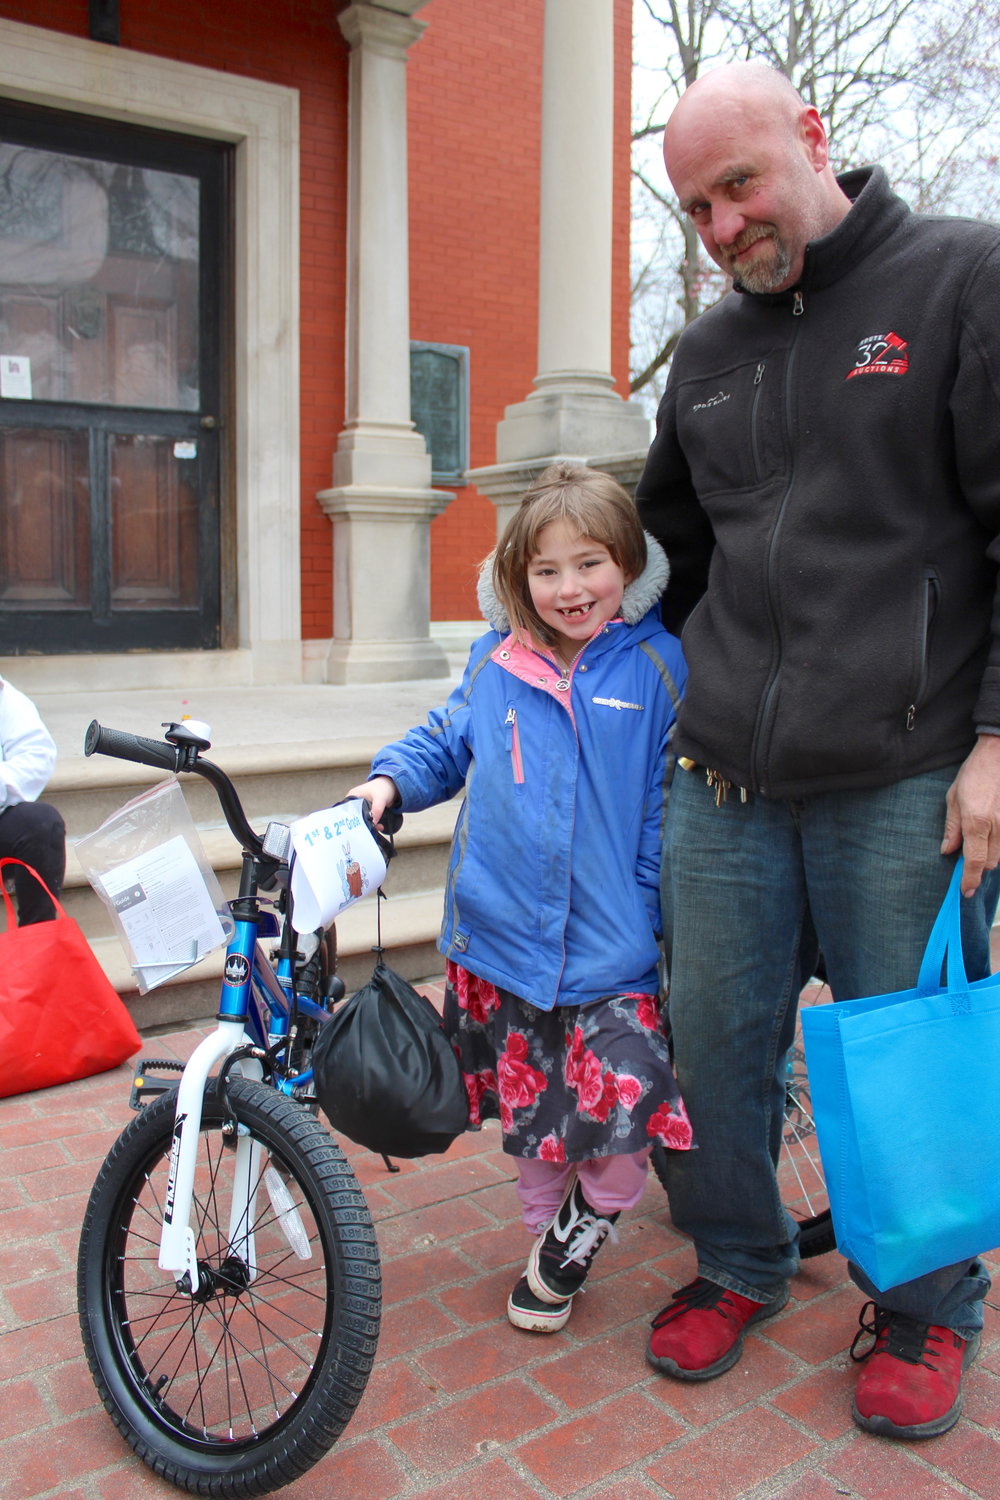 Mariah Walker, 7, accepts her prize Saturday alongside dad Steve Walker following the city’s annual Easter Egg Hunt on the grounds of the Lew Wallace Study. Bikes, sponsored by Nucor, were awarded to those lucky enough to find a golden egg in the scramble.